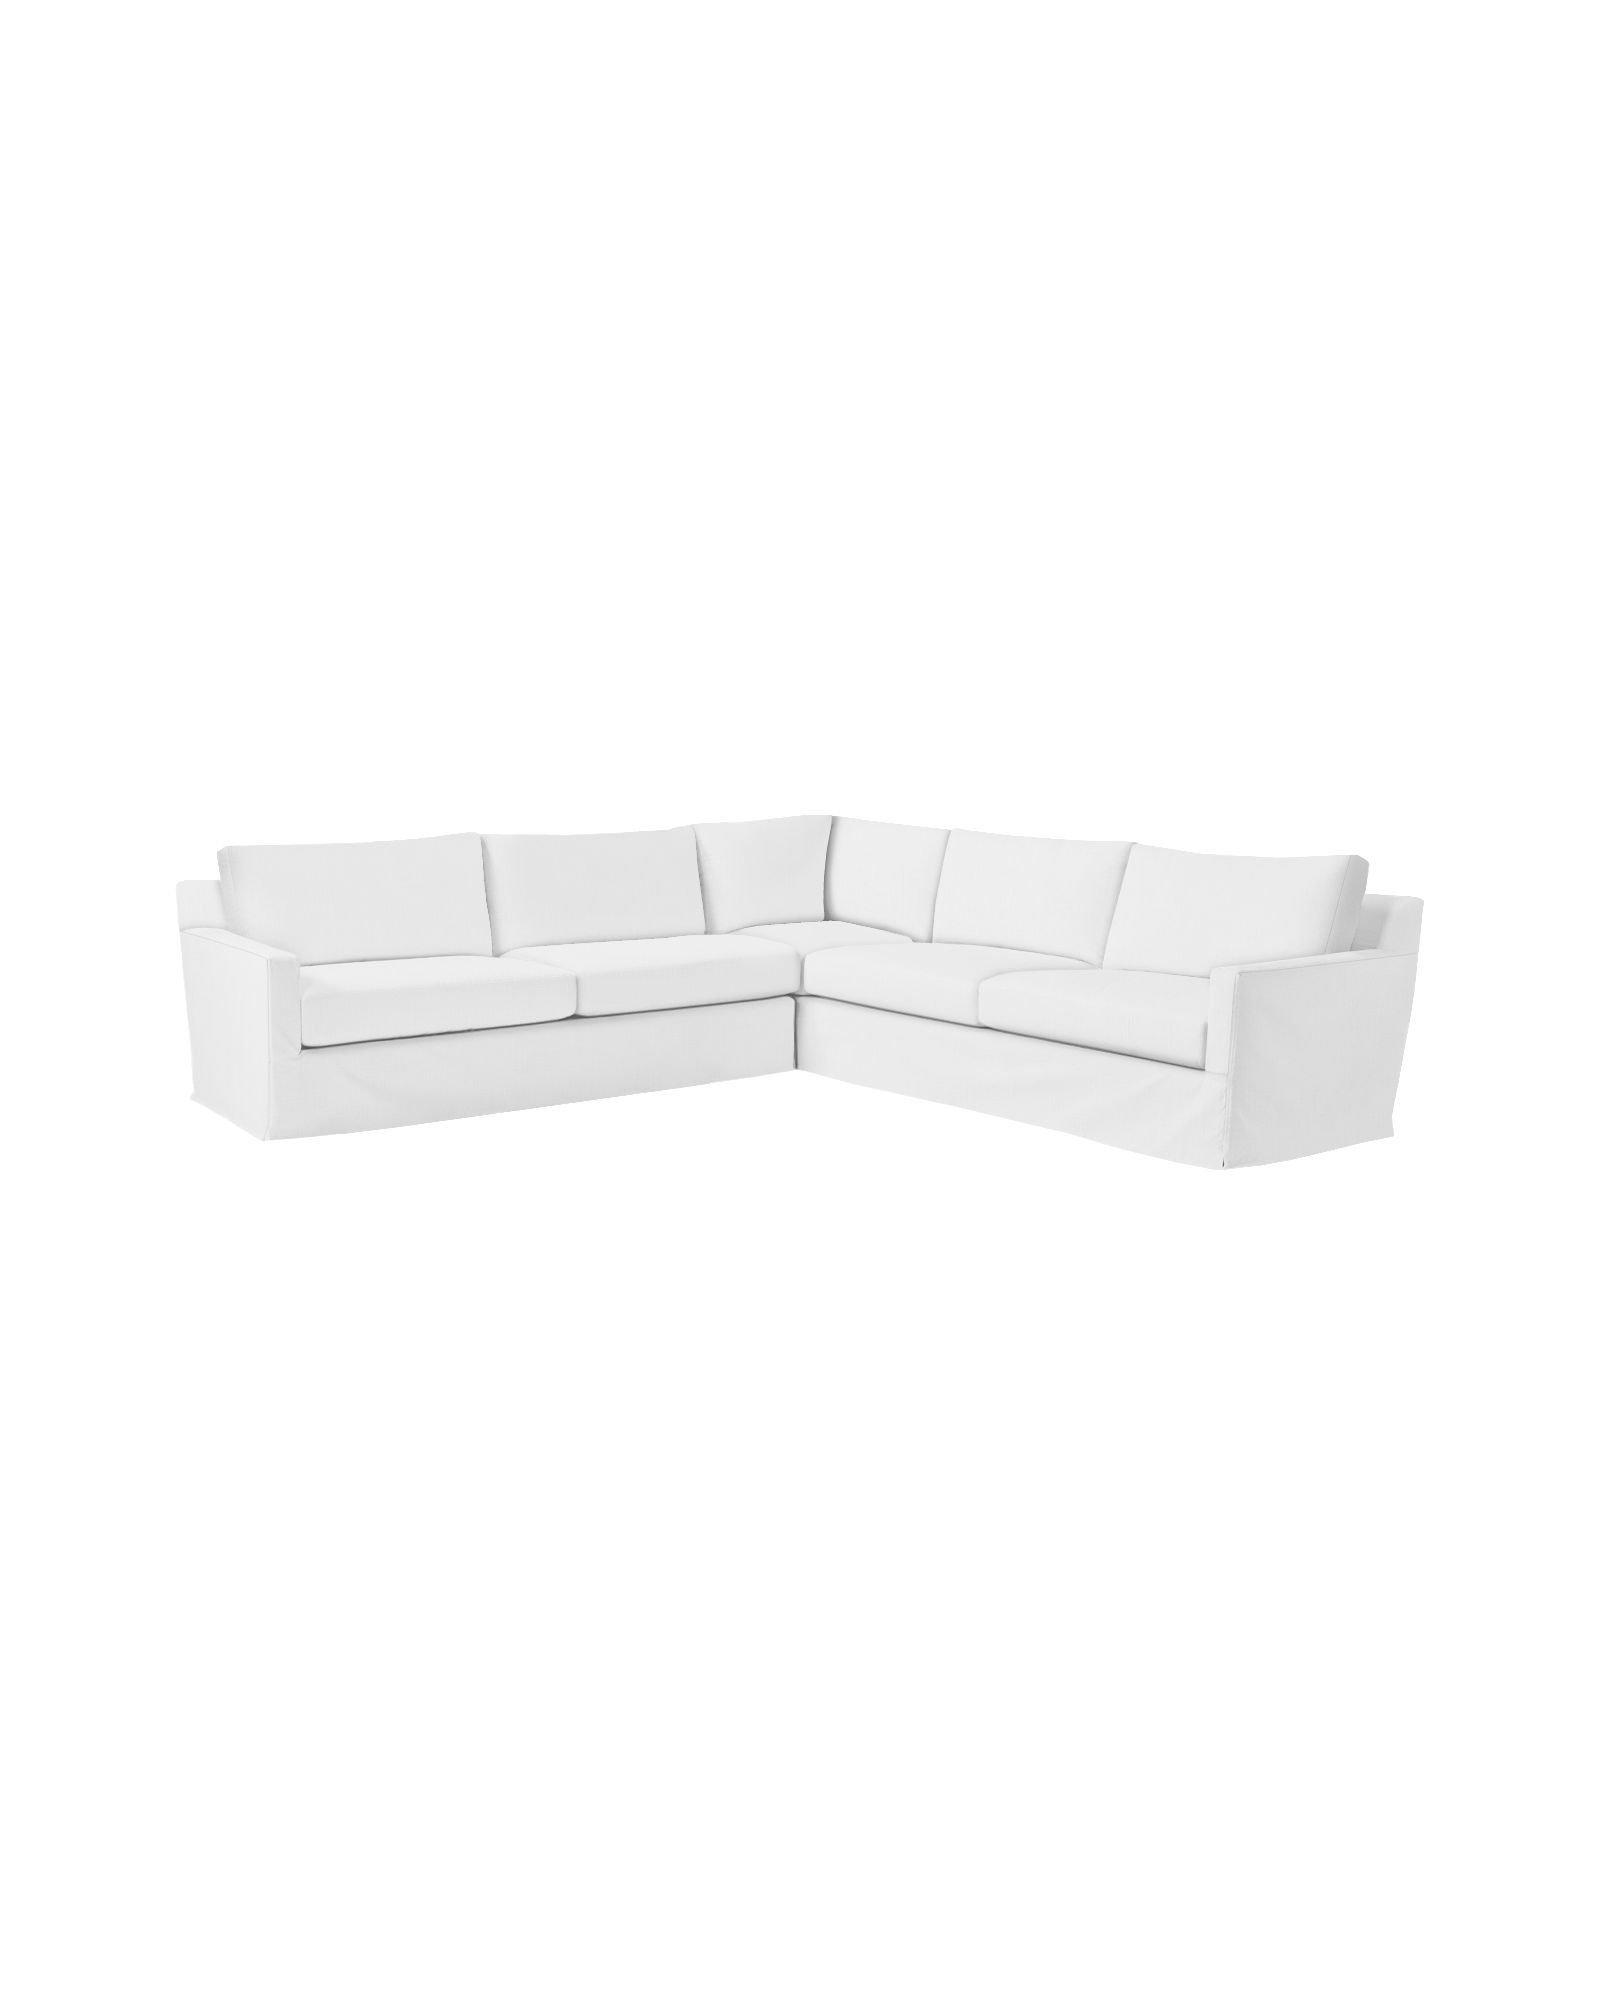 Summit Slipcovered Corner Sectional - Left-Facing | Serena and Lily